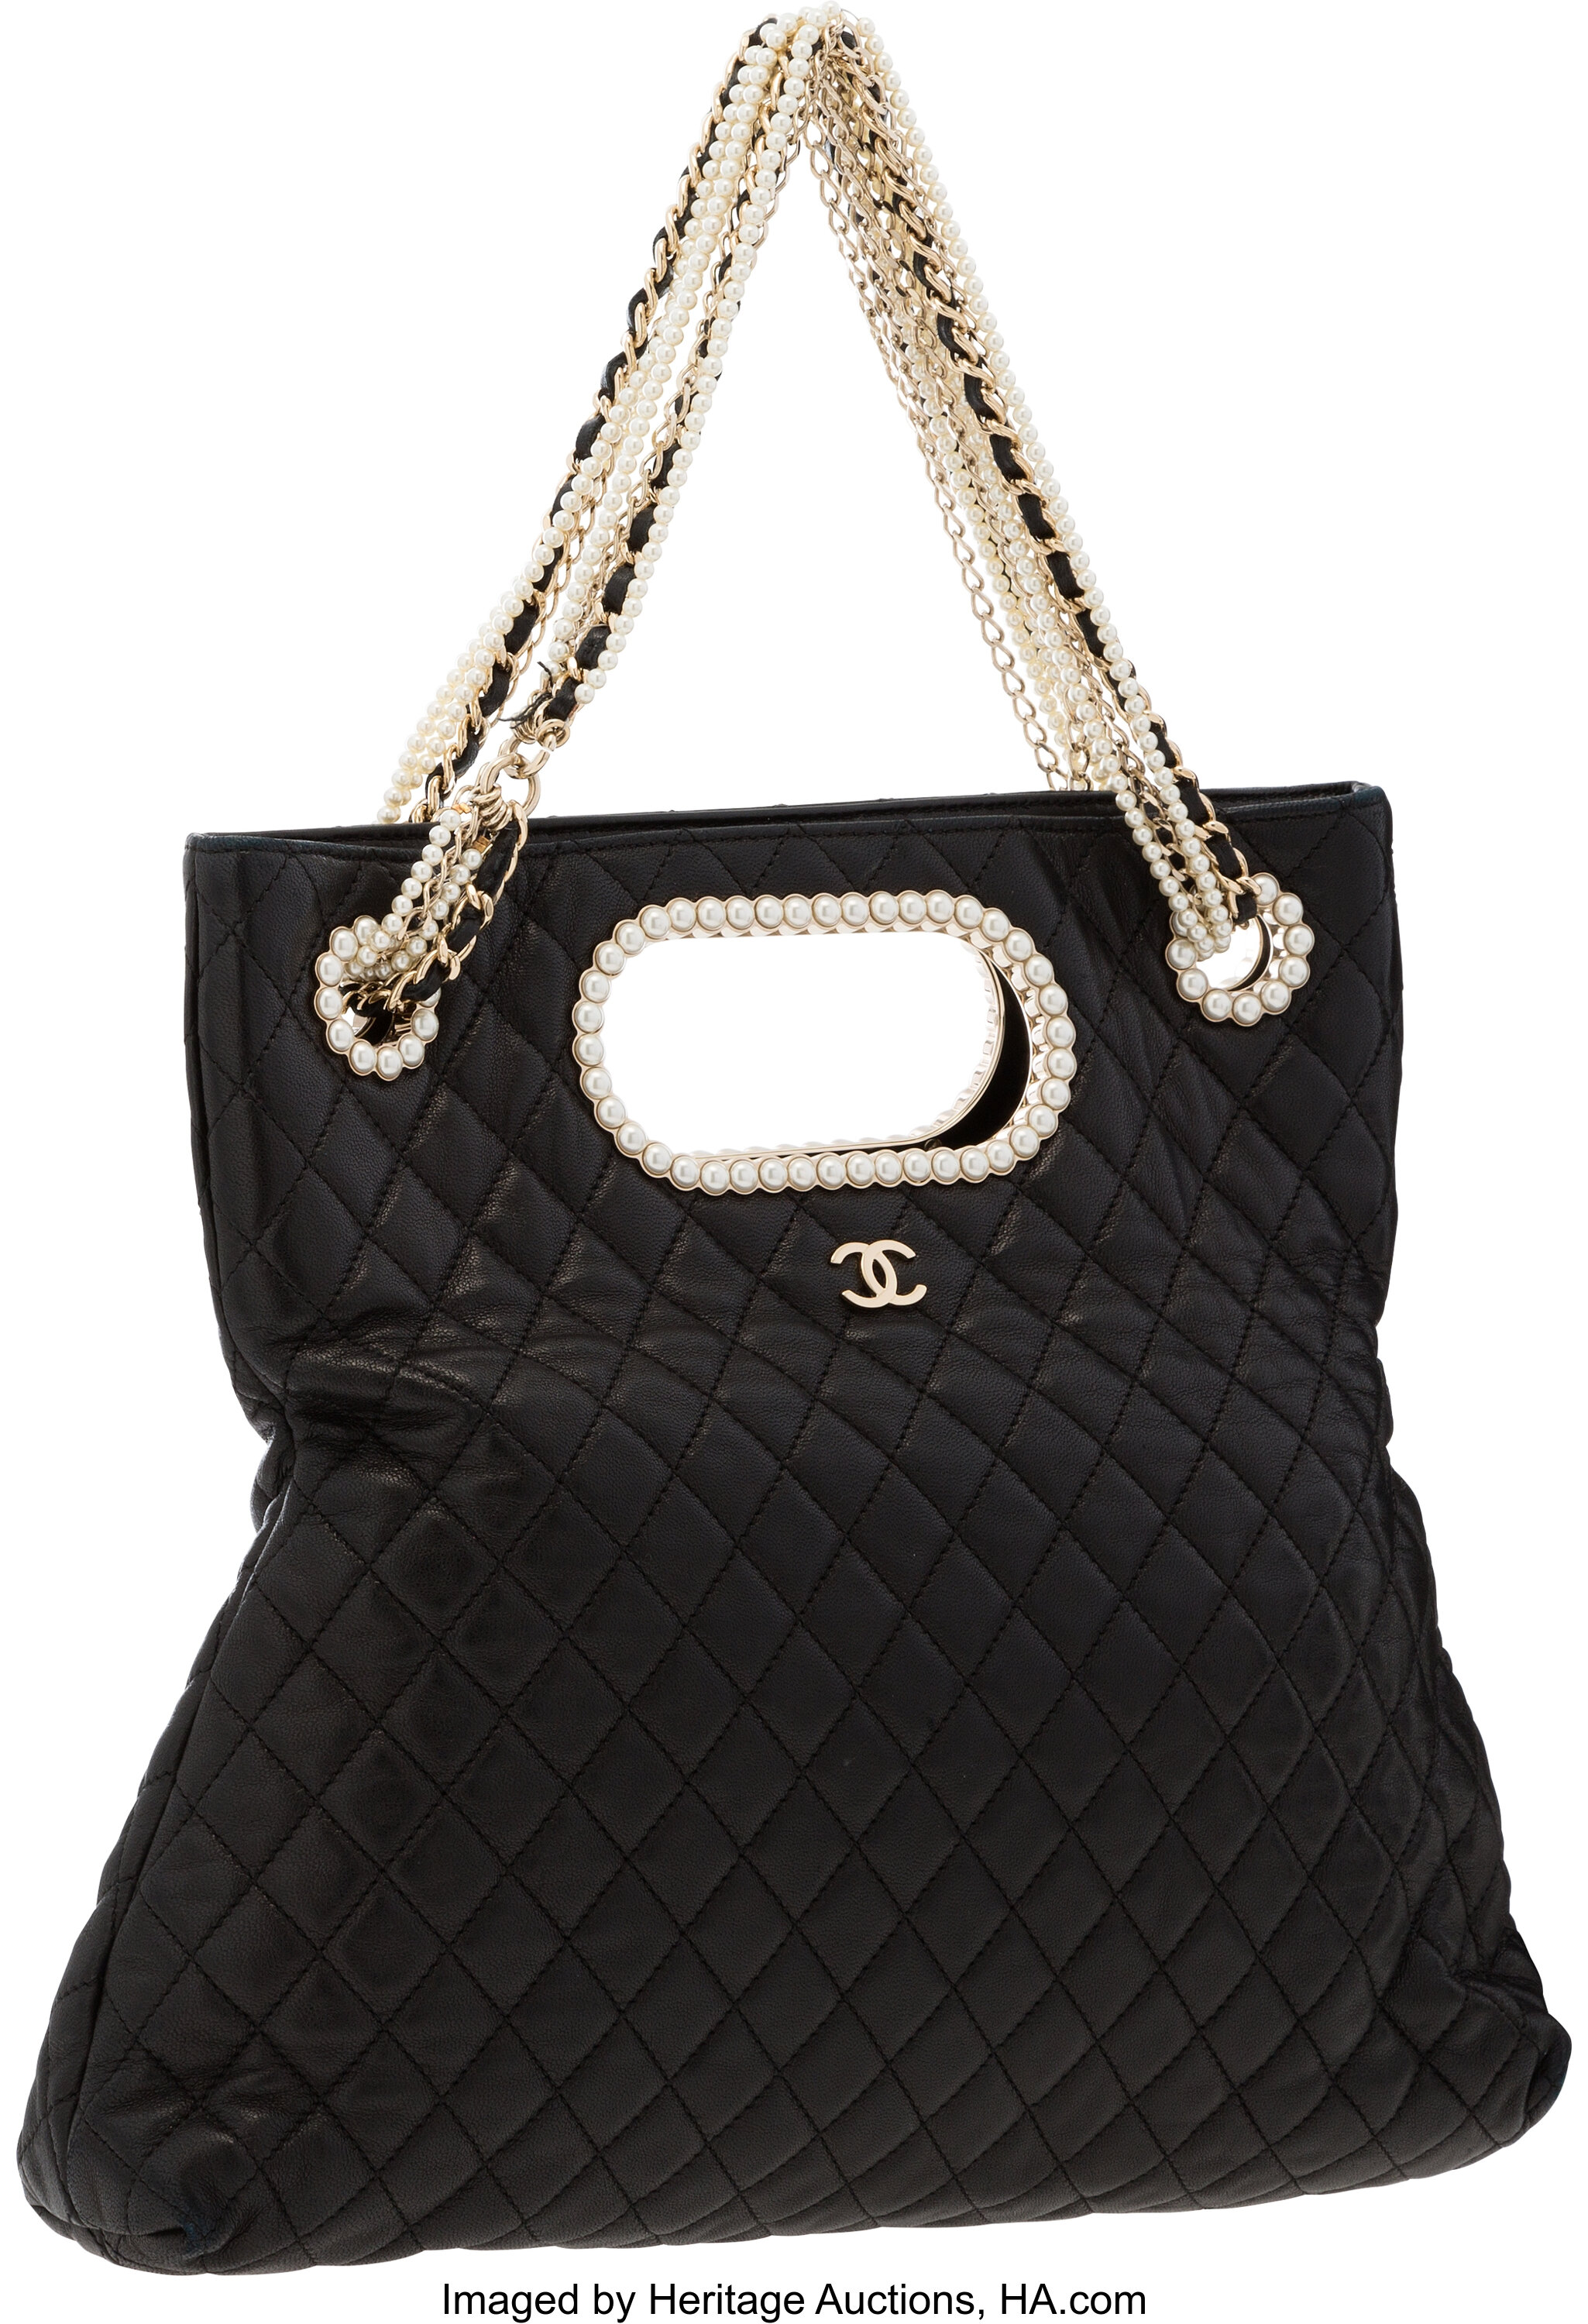 Chanel Black Quilted Lambskin Leather Westminster Bag with Gold